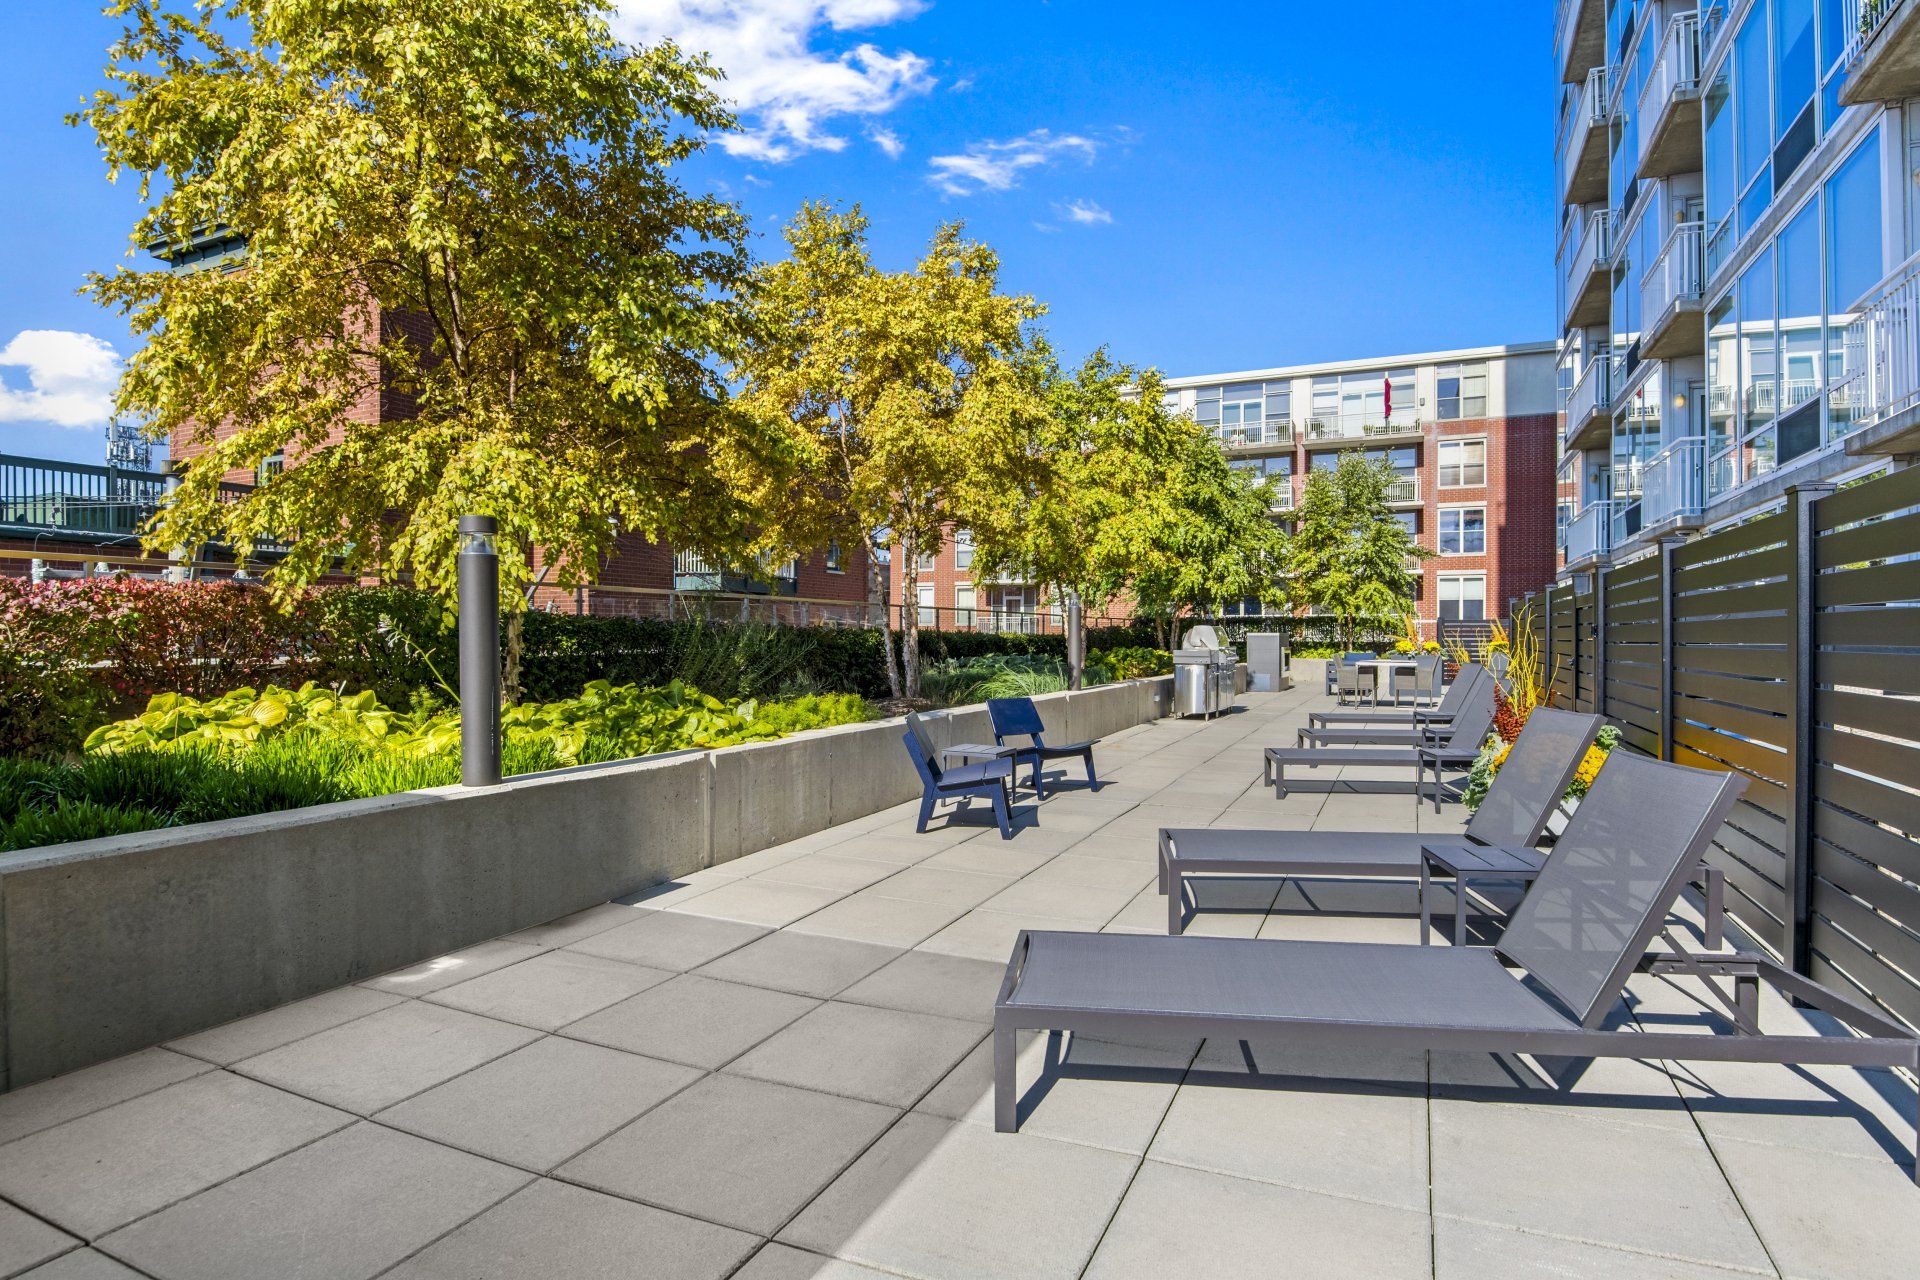 A row of lounge chairs are lined up on a patio in front of a building at 24 S Morgan Apartments.